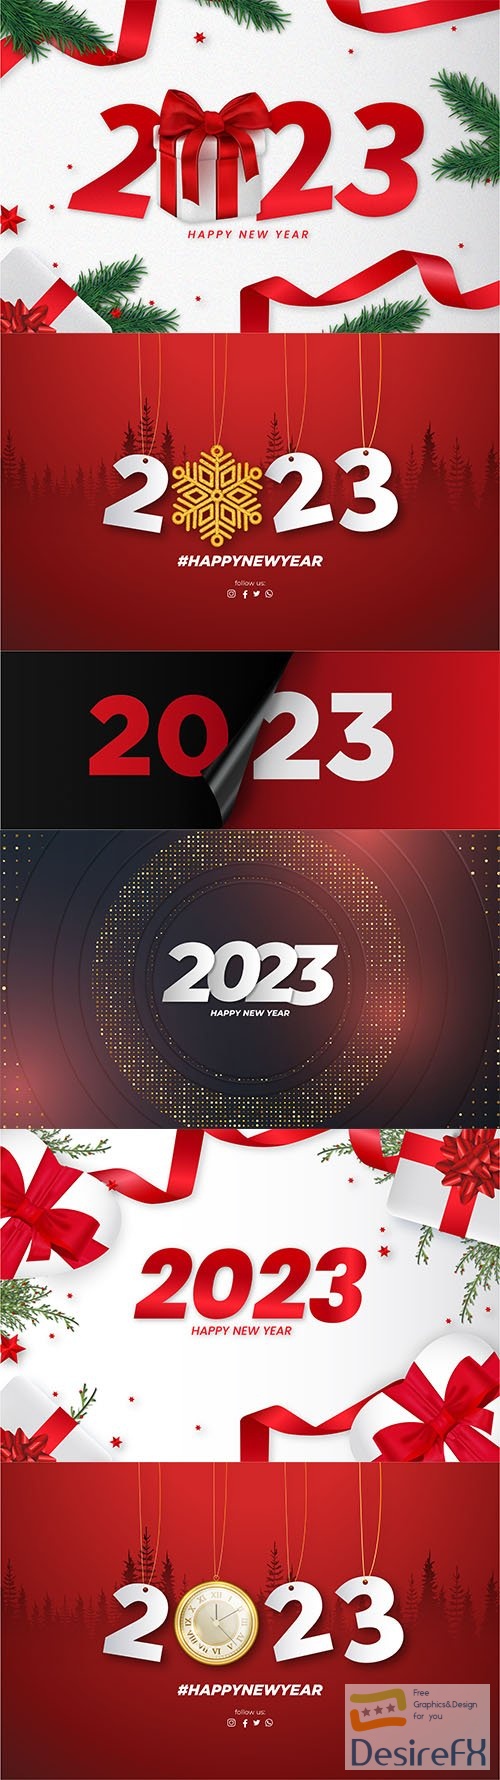 2023 new year on red vector background